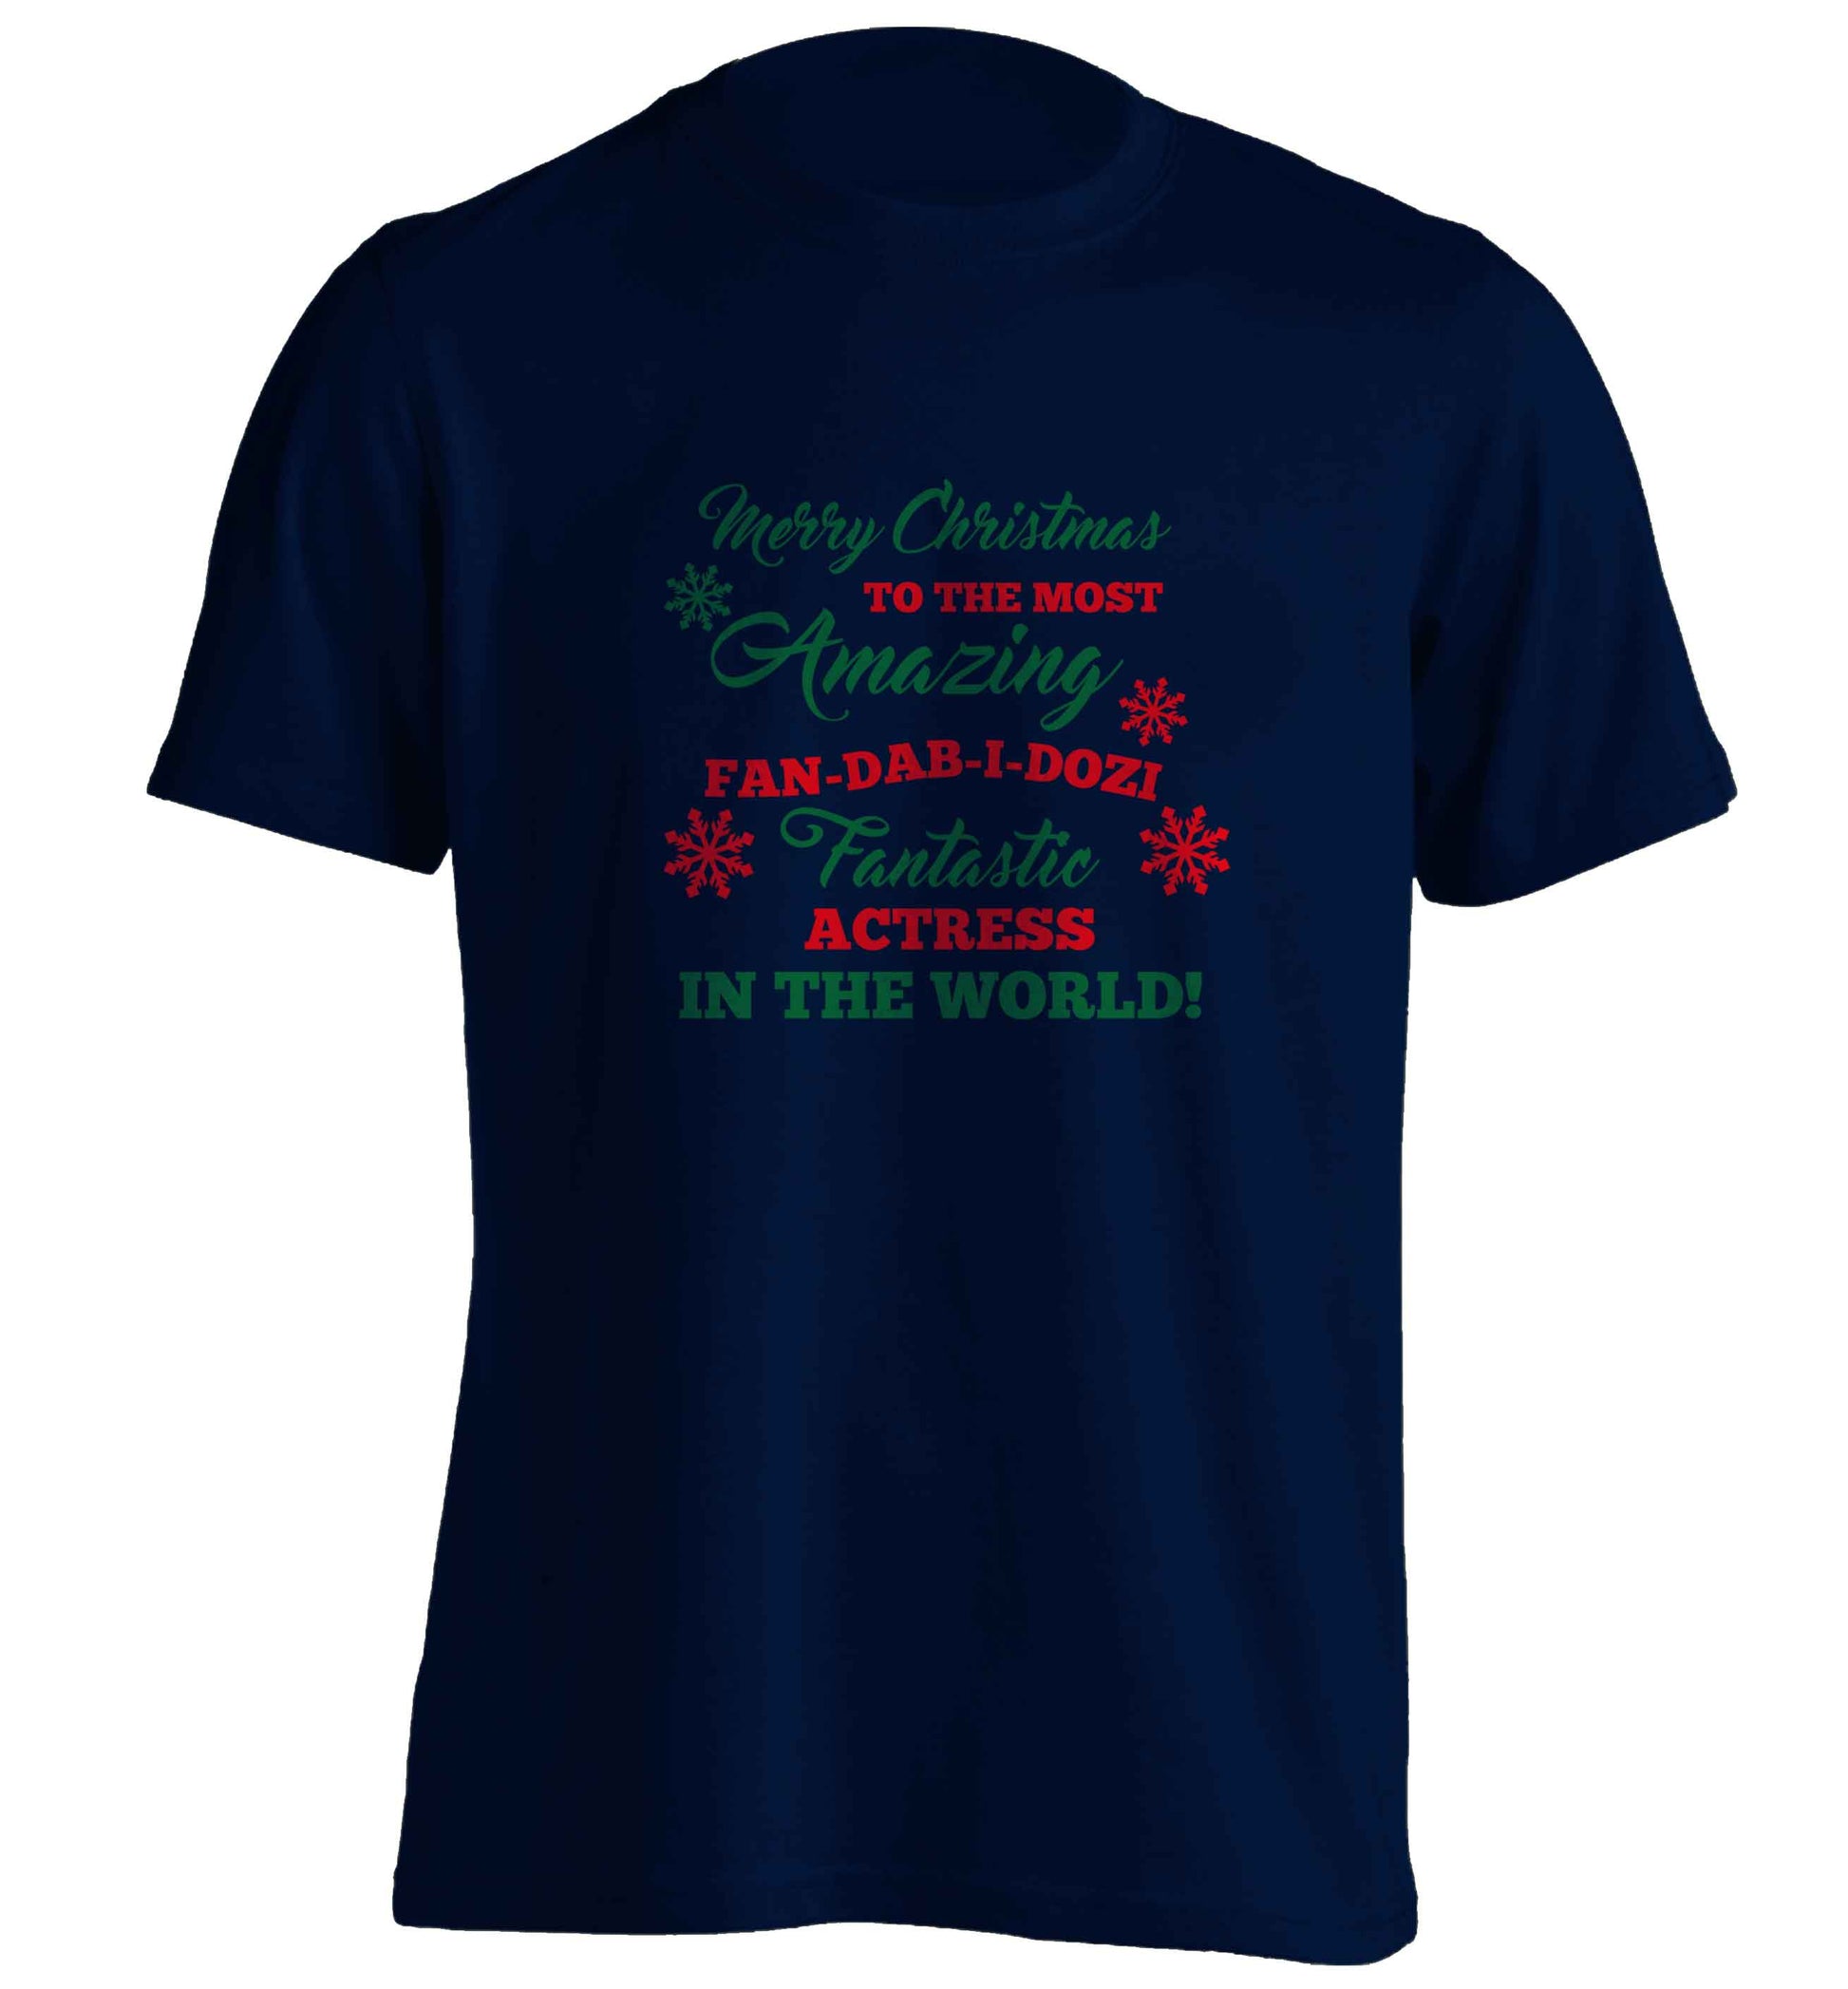 Merry Christmas to the most amazing actress in the world! adults unisex navy Tshirt 2XL